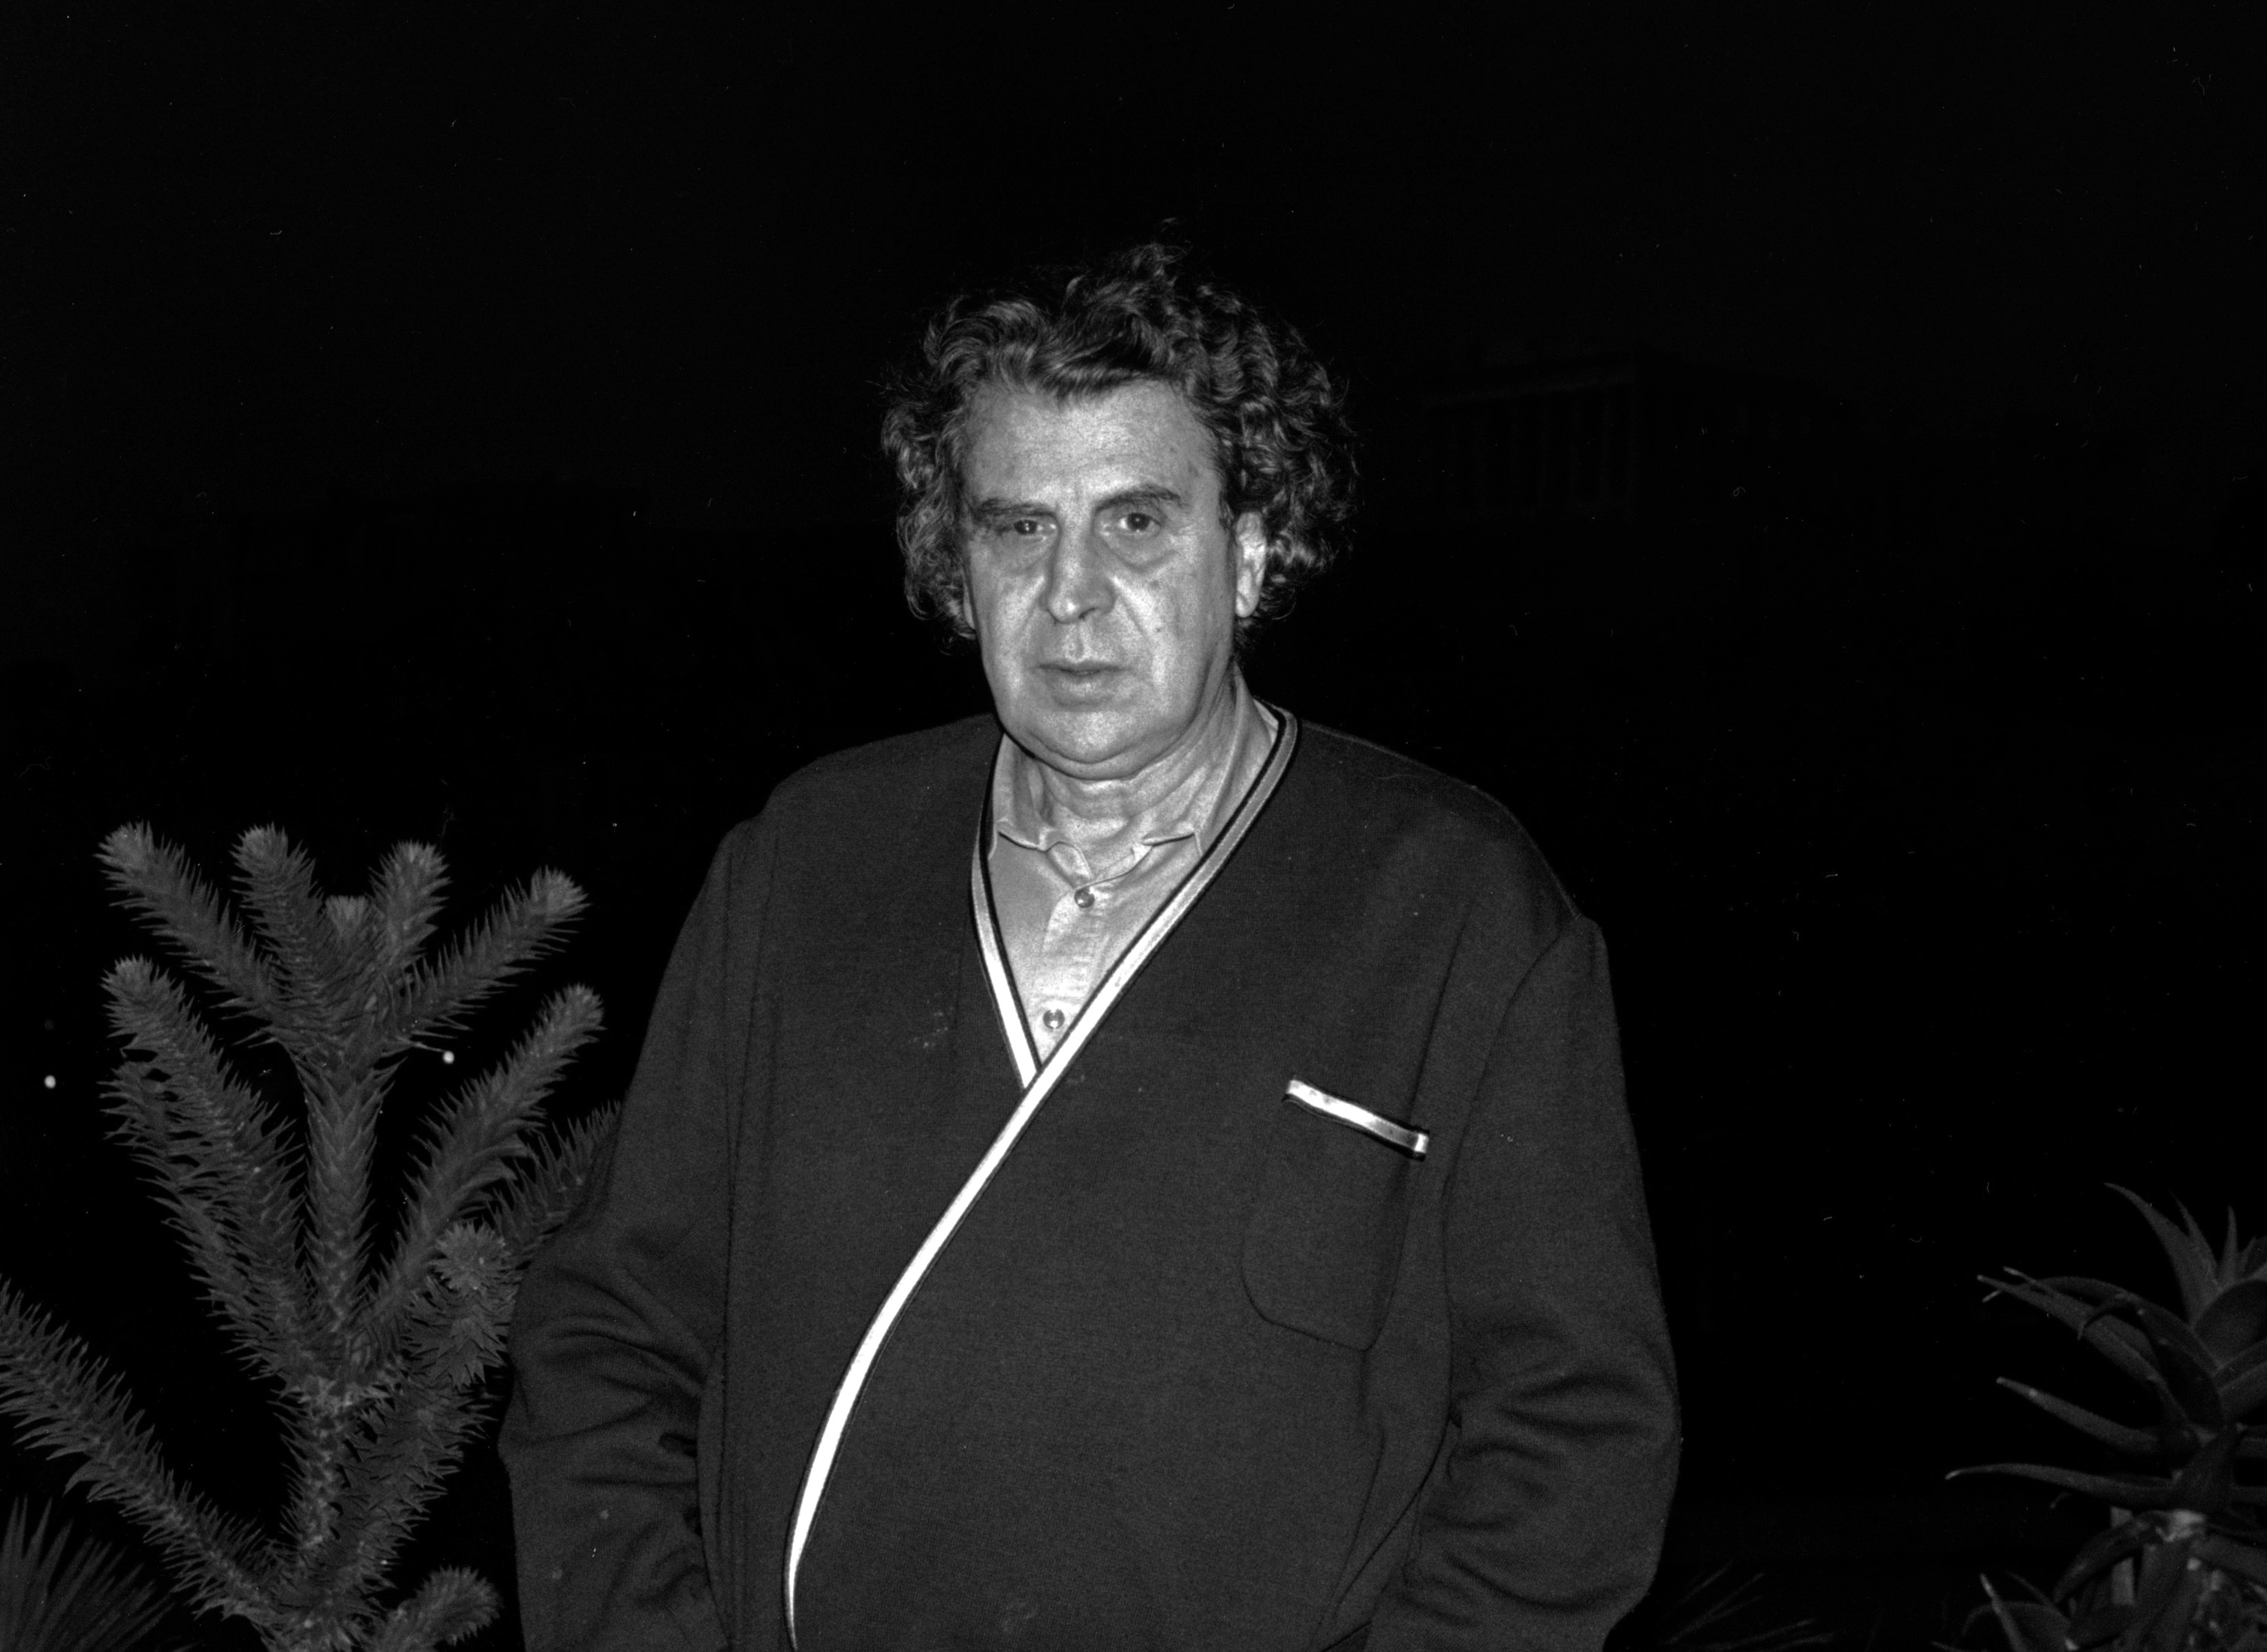 GREEK COMPOSER THEODORAKIS GIVES INTERVIEW TO REUTERS ON BALCONY ACROSS FROM ACROPOLIS IN ATHENS.